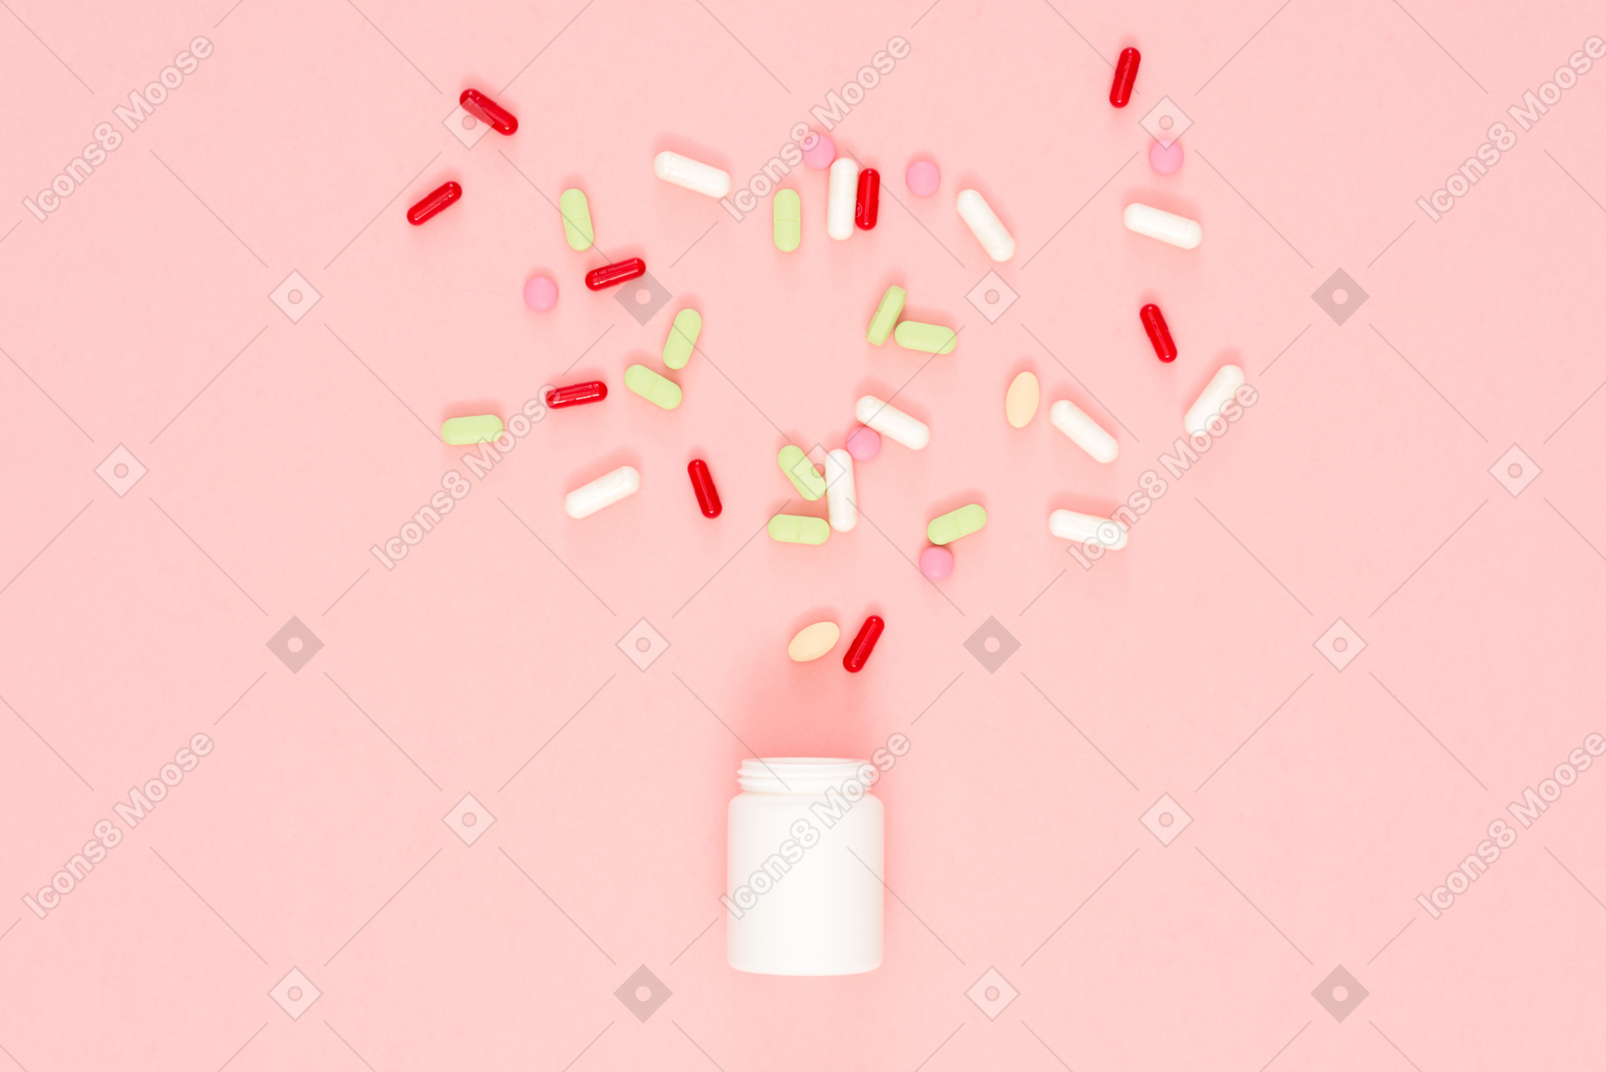 Pills and capsules dropped out of pills bottle